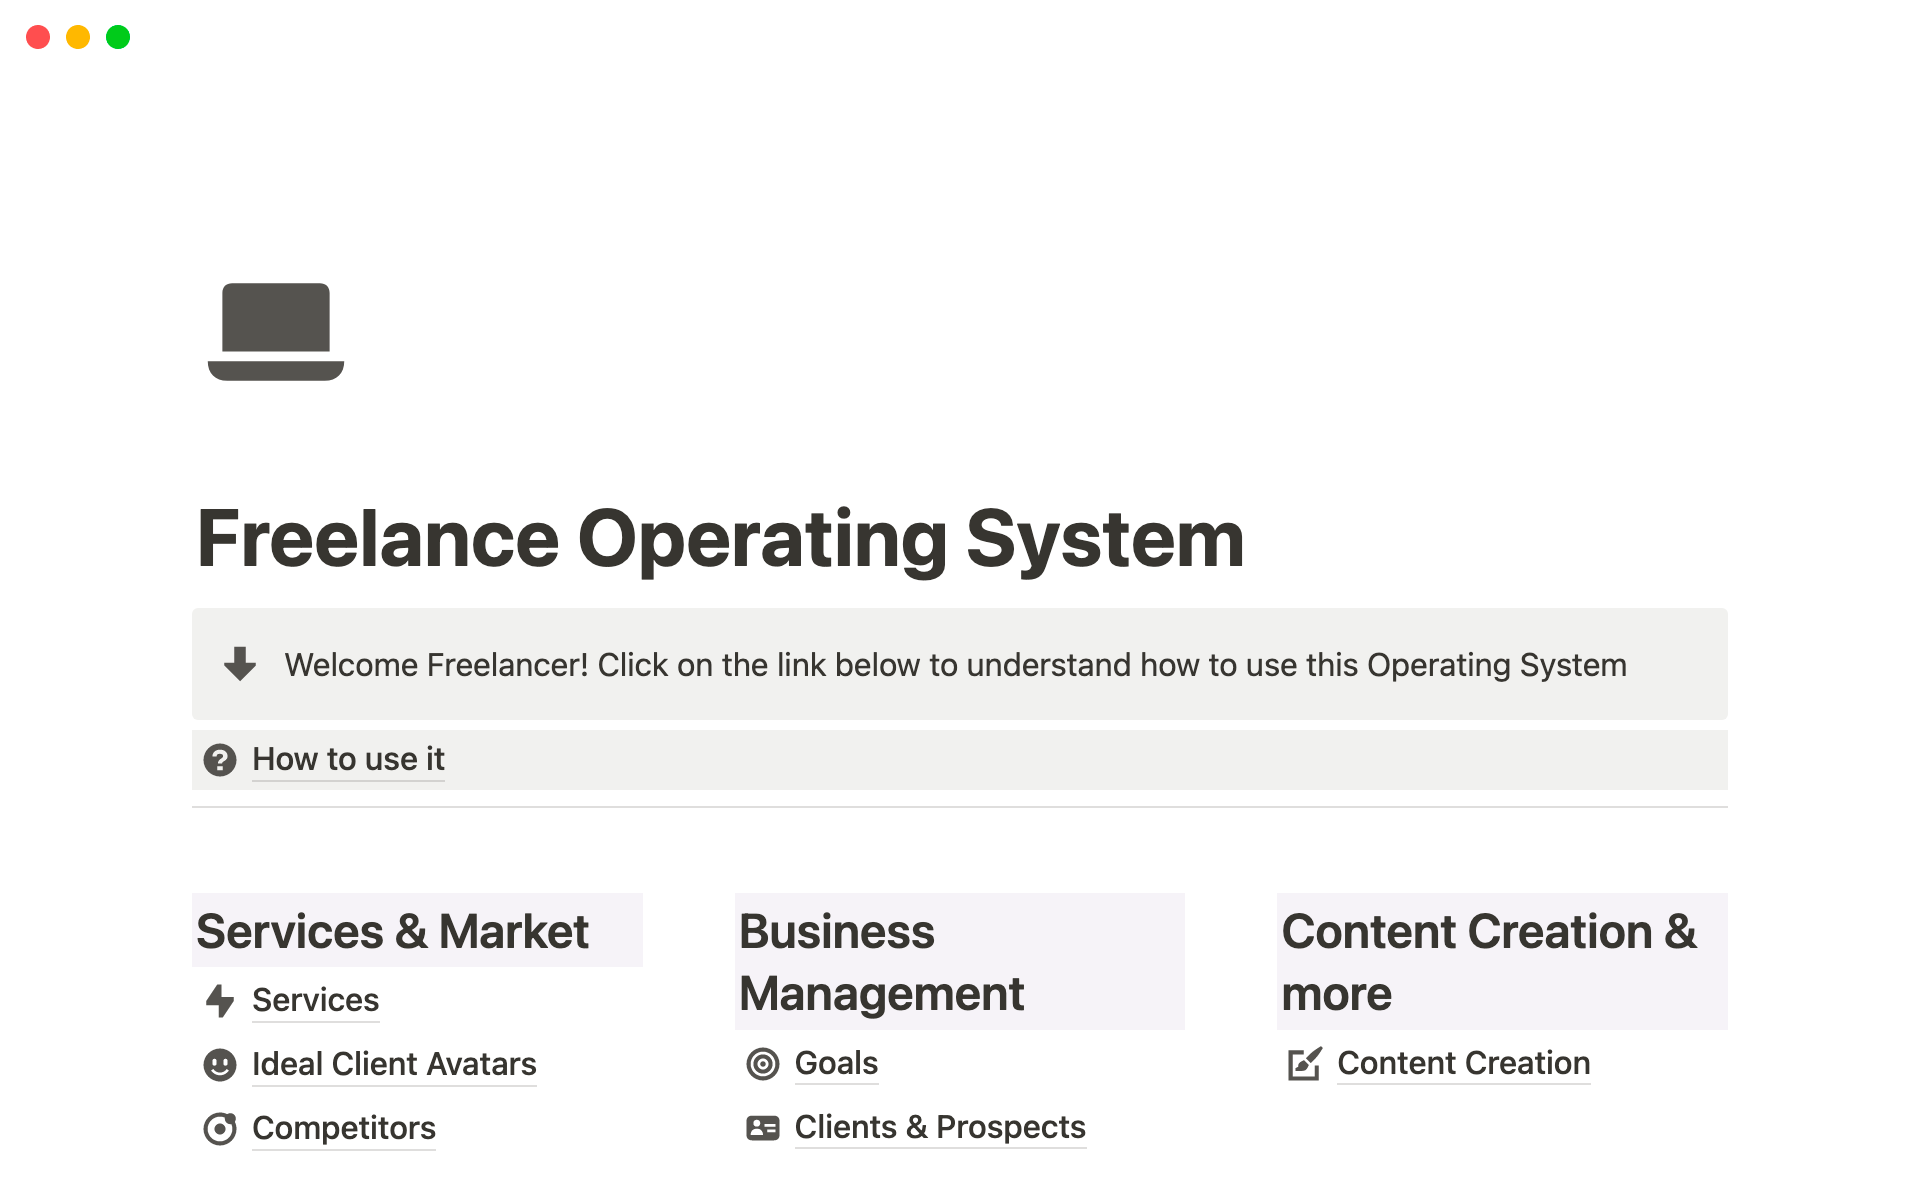 Complete Freelance Operating System to innovate the way you manage your freelance business.